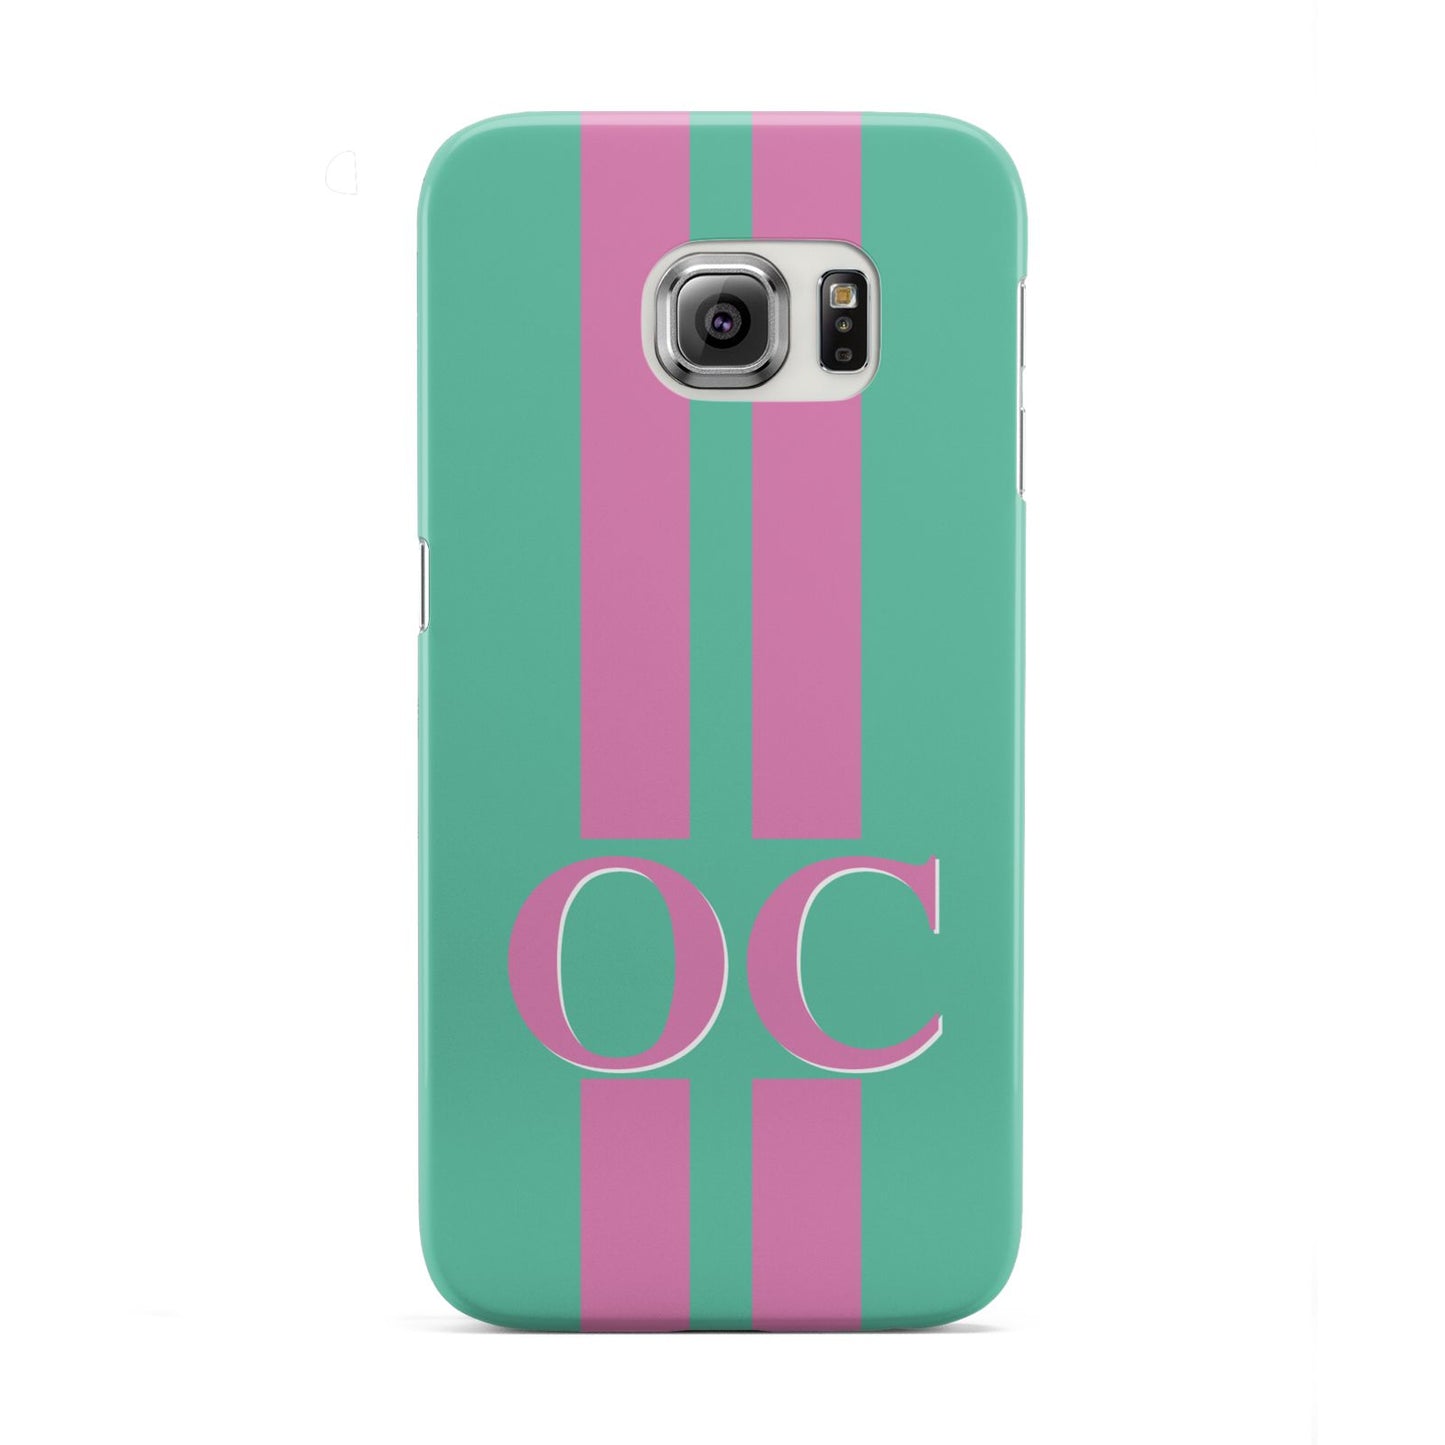 Green Personalised Initials Samsung Galaxy S6 Edge Case